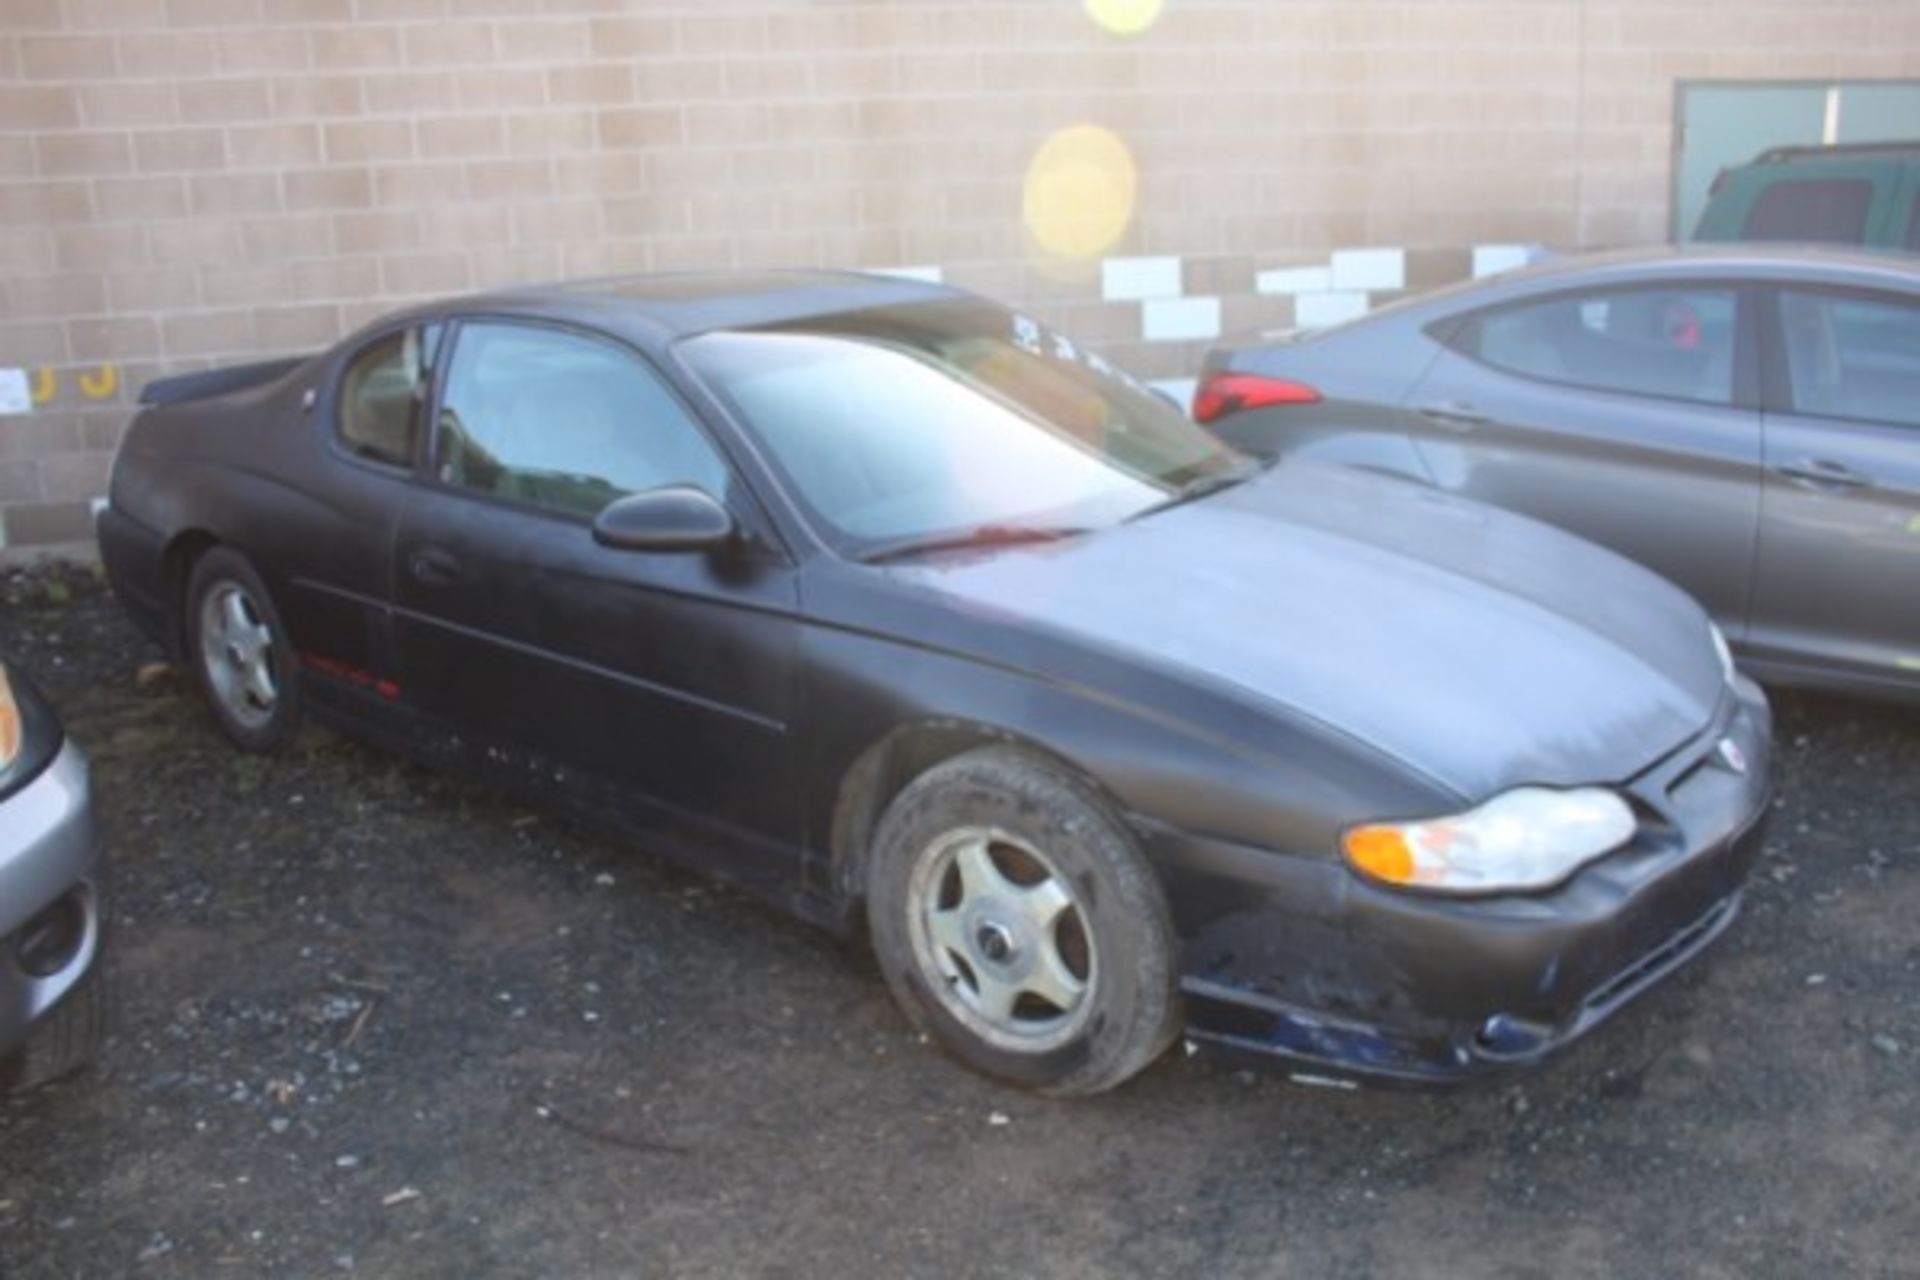 2001 Monte Carlo SS - Image 3 of 6